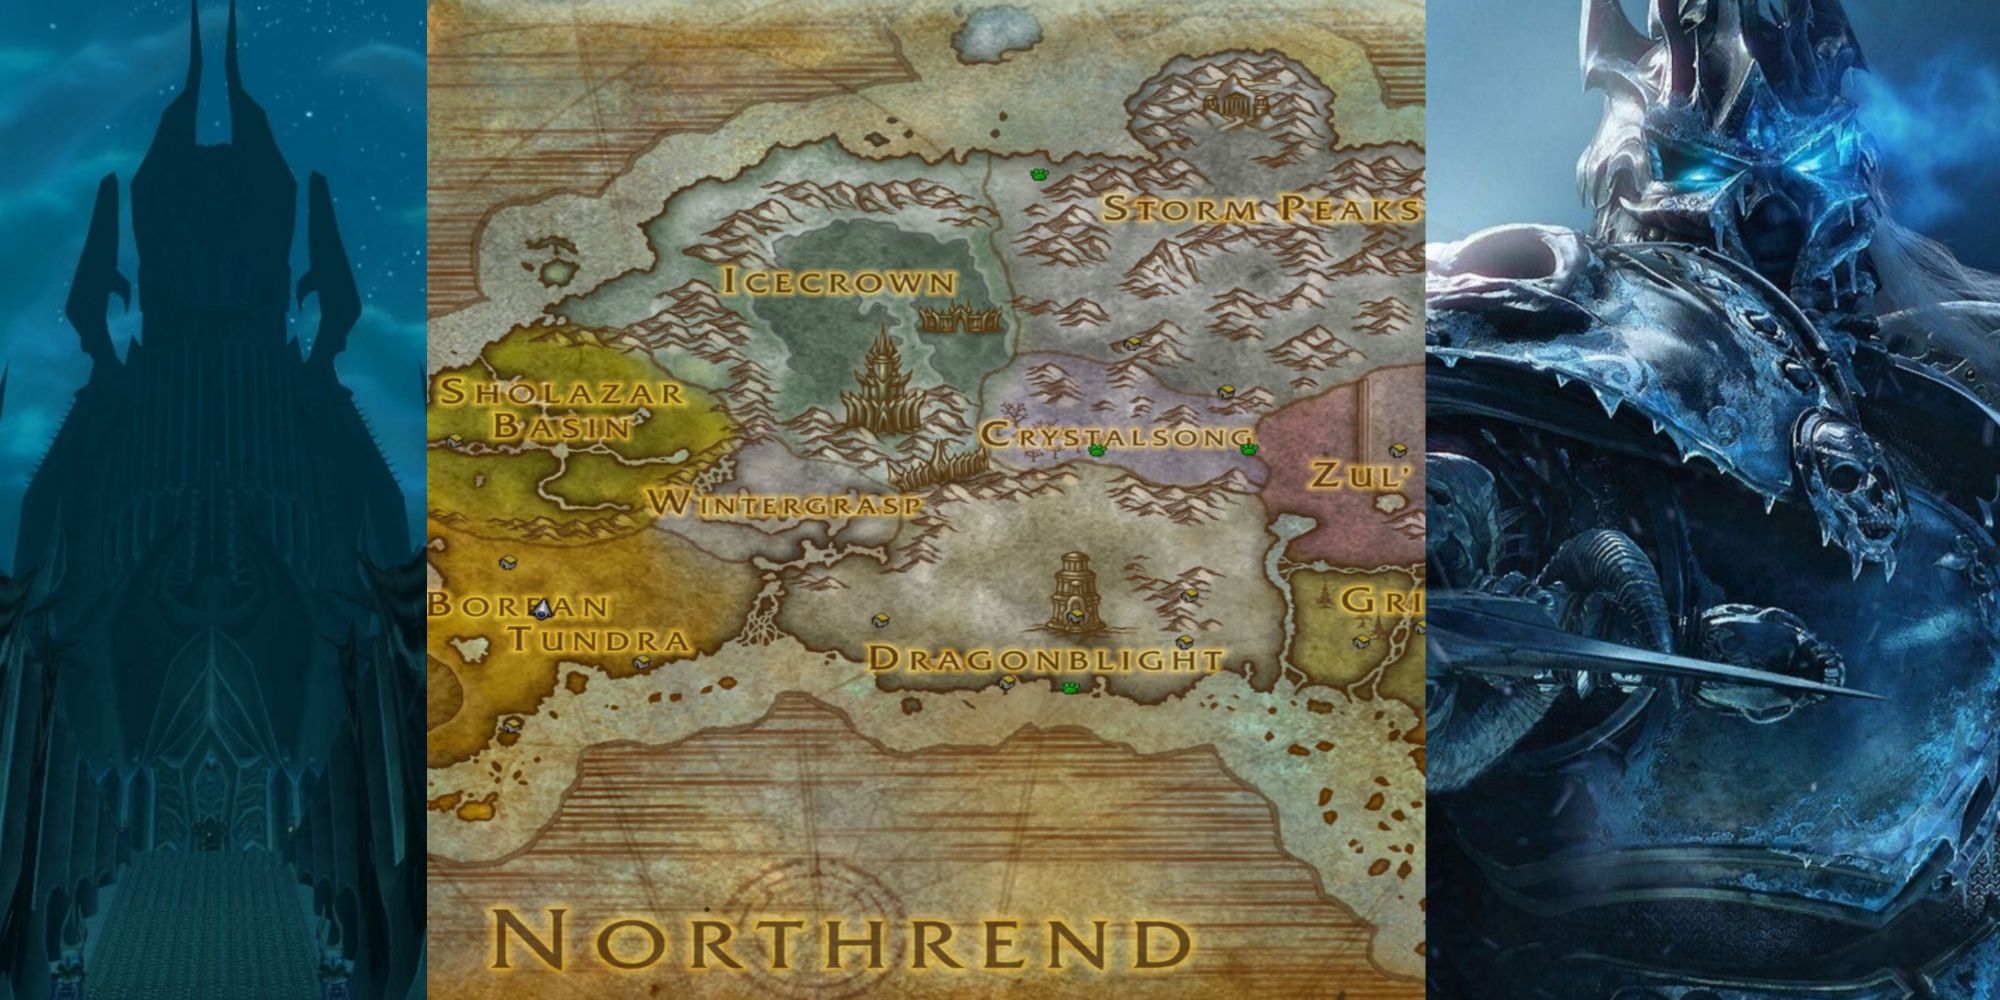 title split image items for Wrath of the Lich King Icecrown Citadel map of Northrend Lich King promotional image